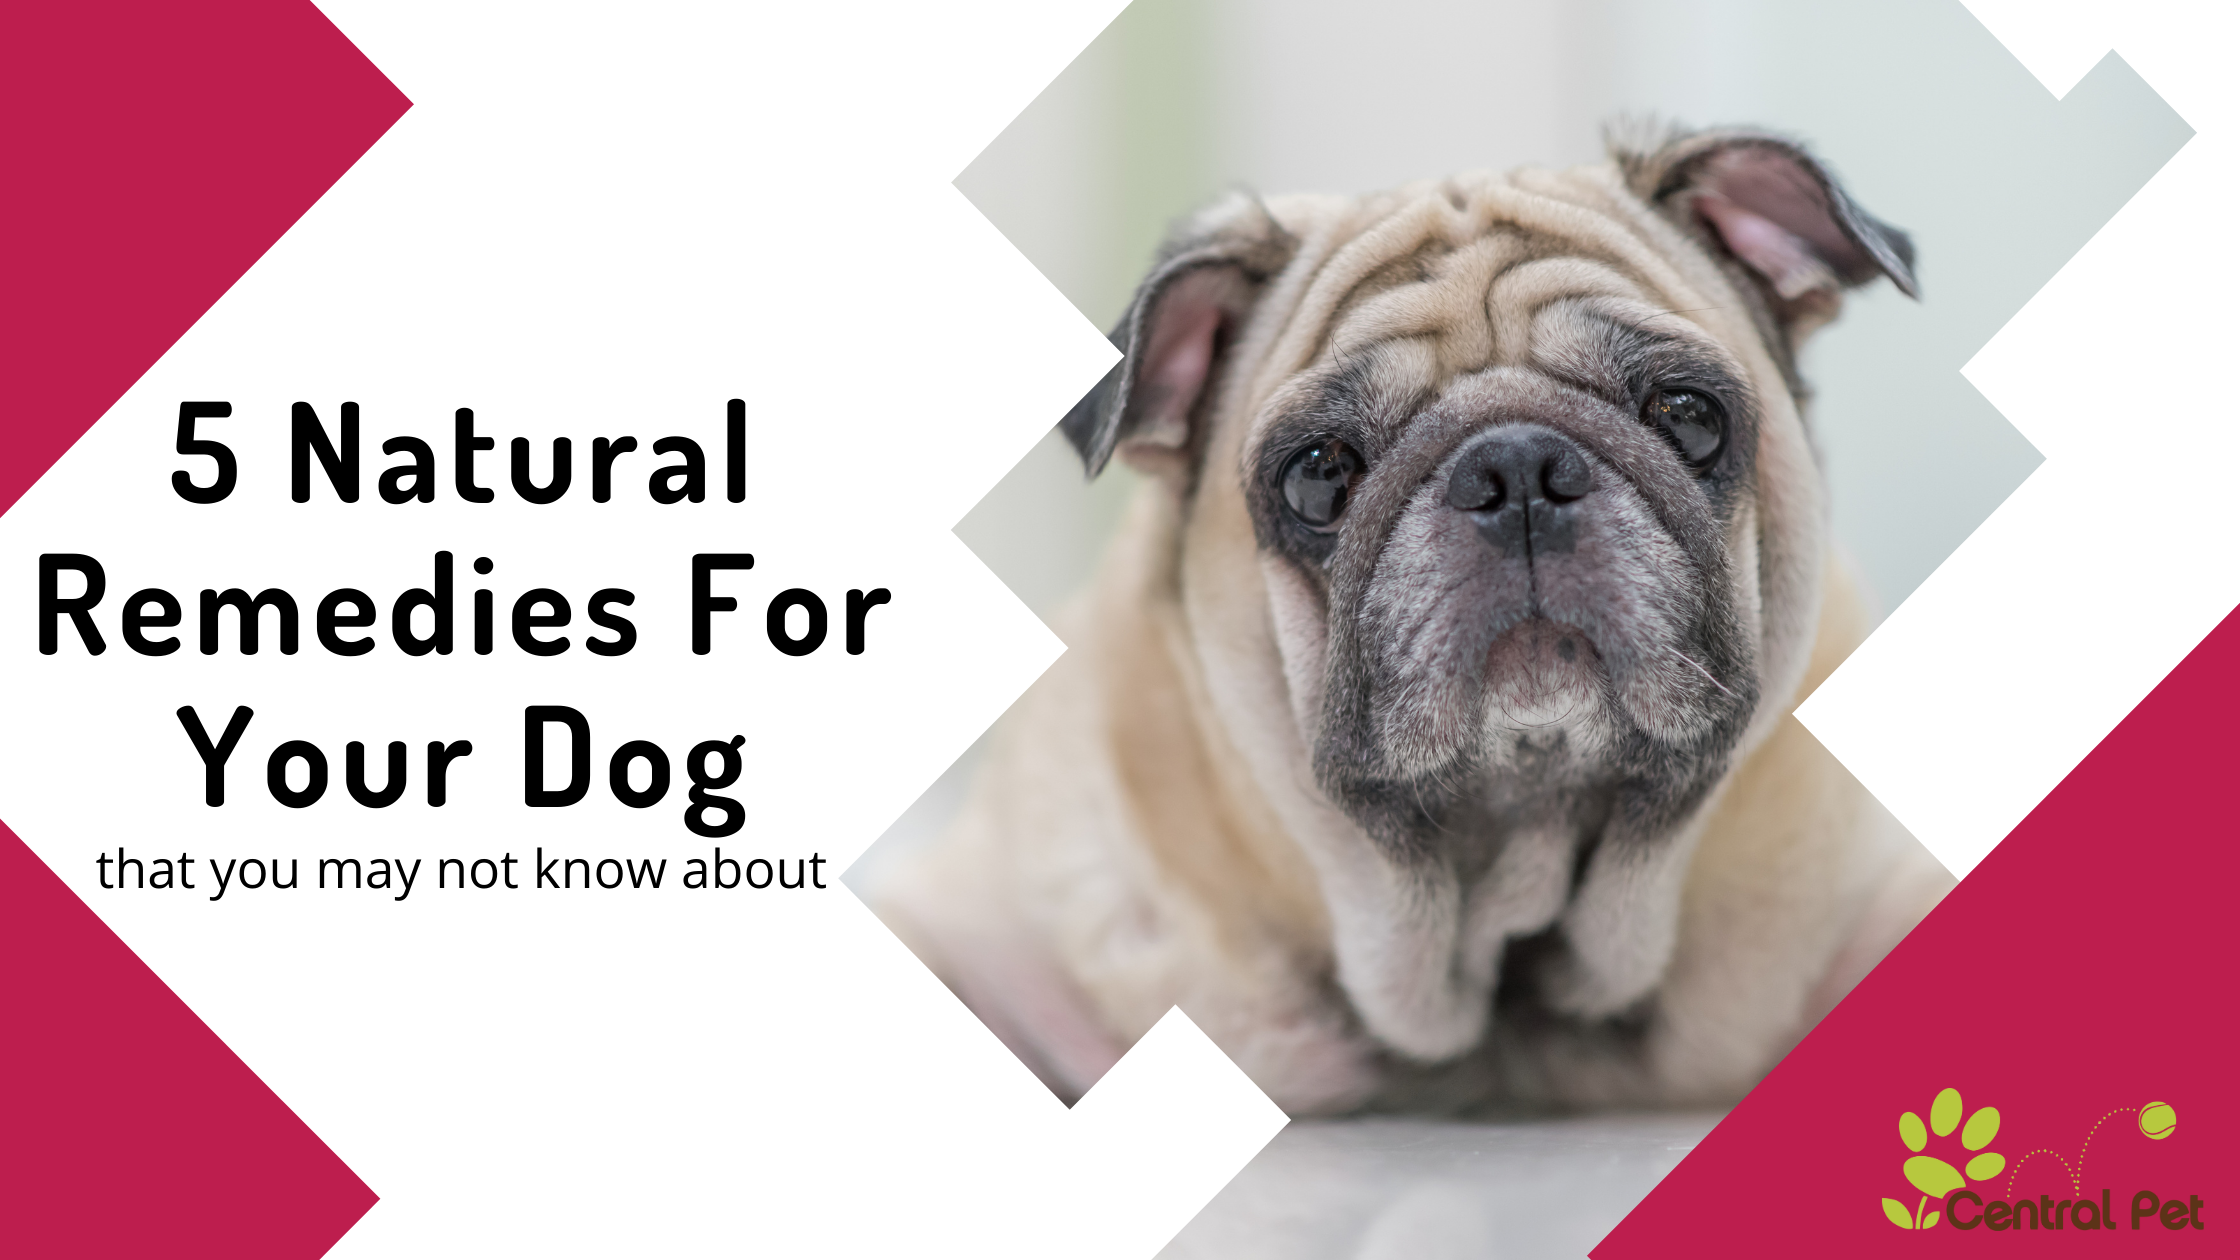 5 Natural Remedies for Dogs that You May Not Know About